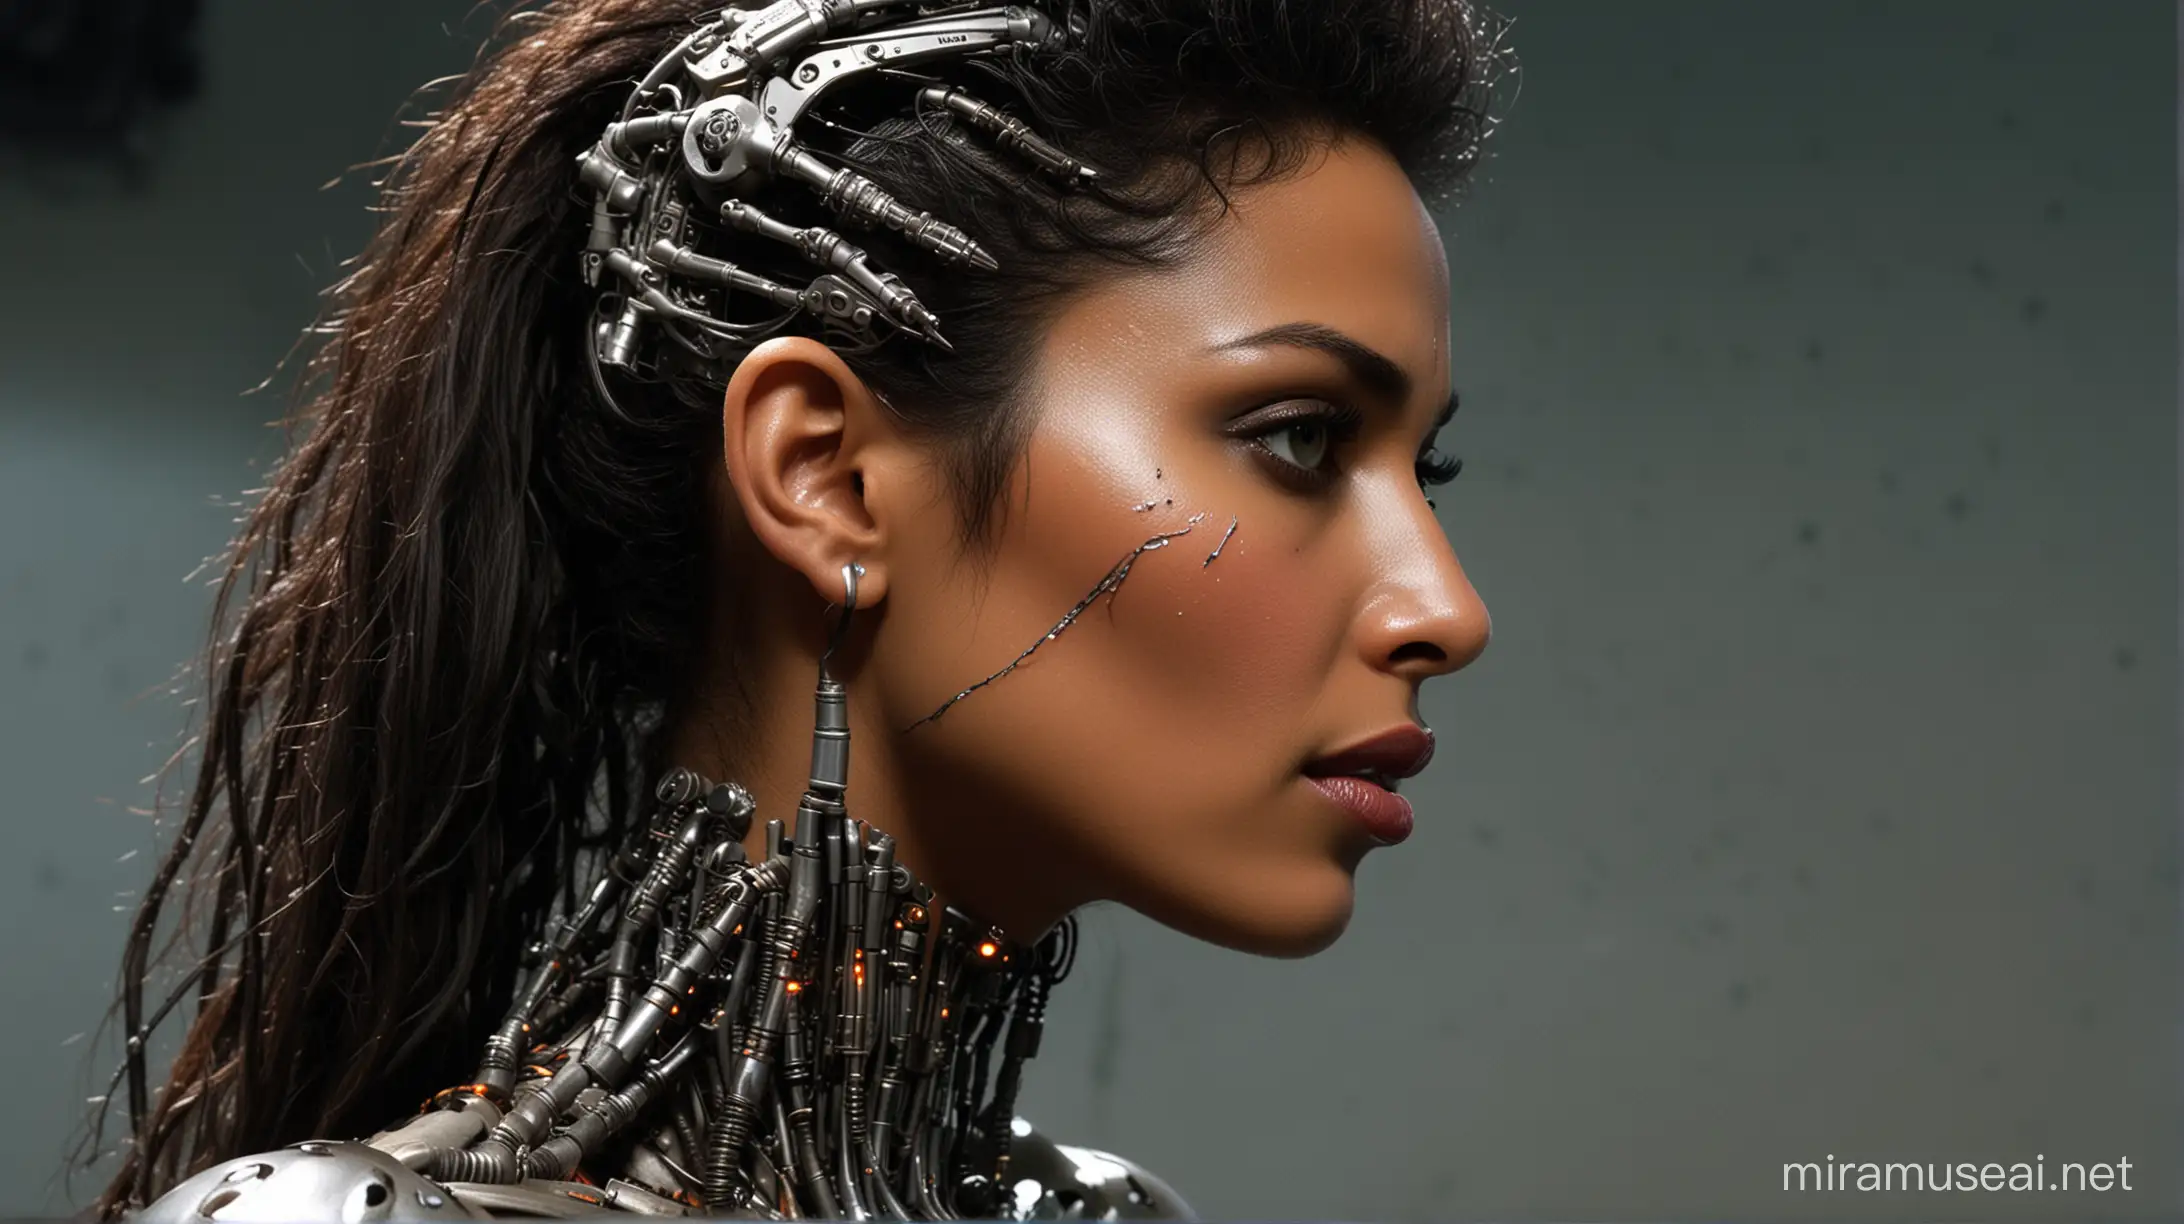 
A hyper realistic, photogenic, very young and fully naked cyborg Terminator Pam Grier in profile, with her lips closed, with half of her hyper detailed exo-skeleton and glowing cybernetic eye exposed, with bullet wounds and electrical sparks flying from the interior of her neon lit exoskeleton, looking at a fully robotic, cybernetic version of herself in a highly reflective green neon lit glass mirror.
